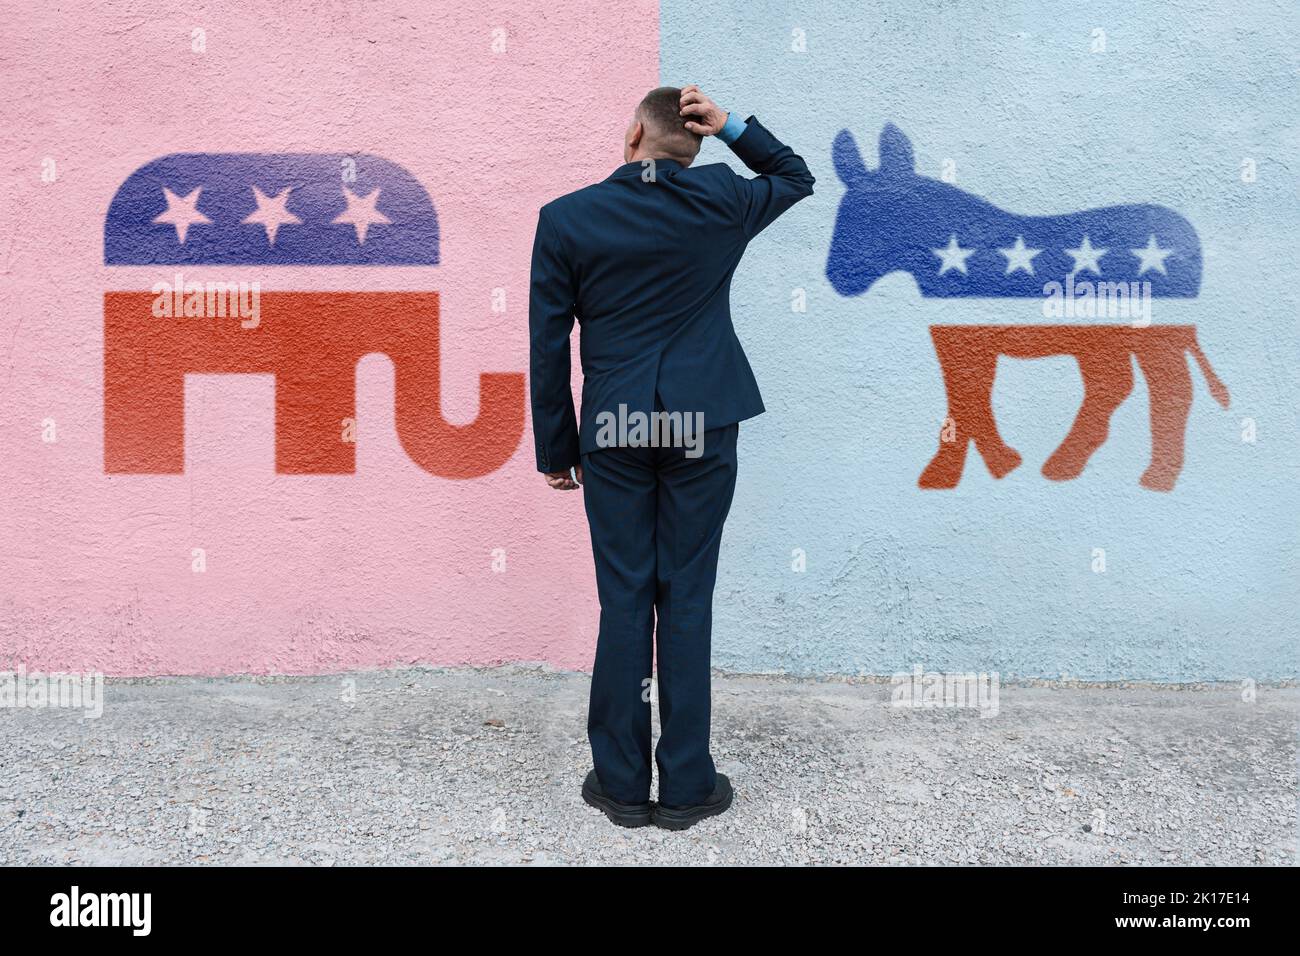 man thinks in the background wall with symbols of US parties. In American politics US parties are represented by either the democrat donkey or republi Stock Photo